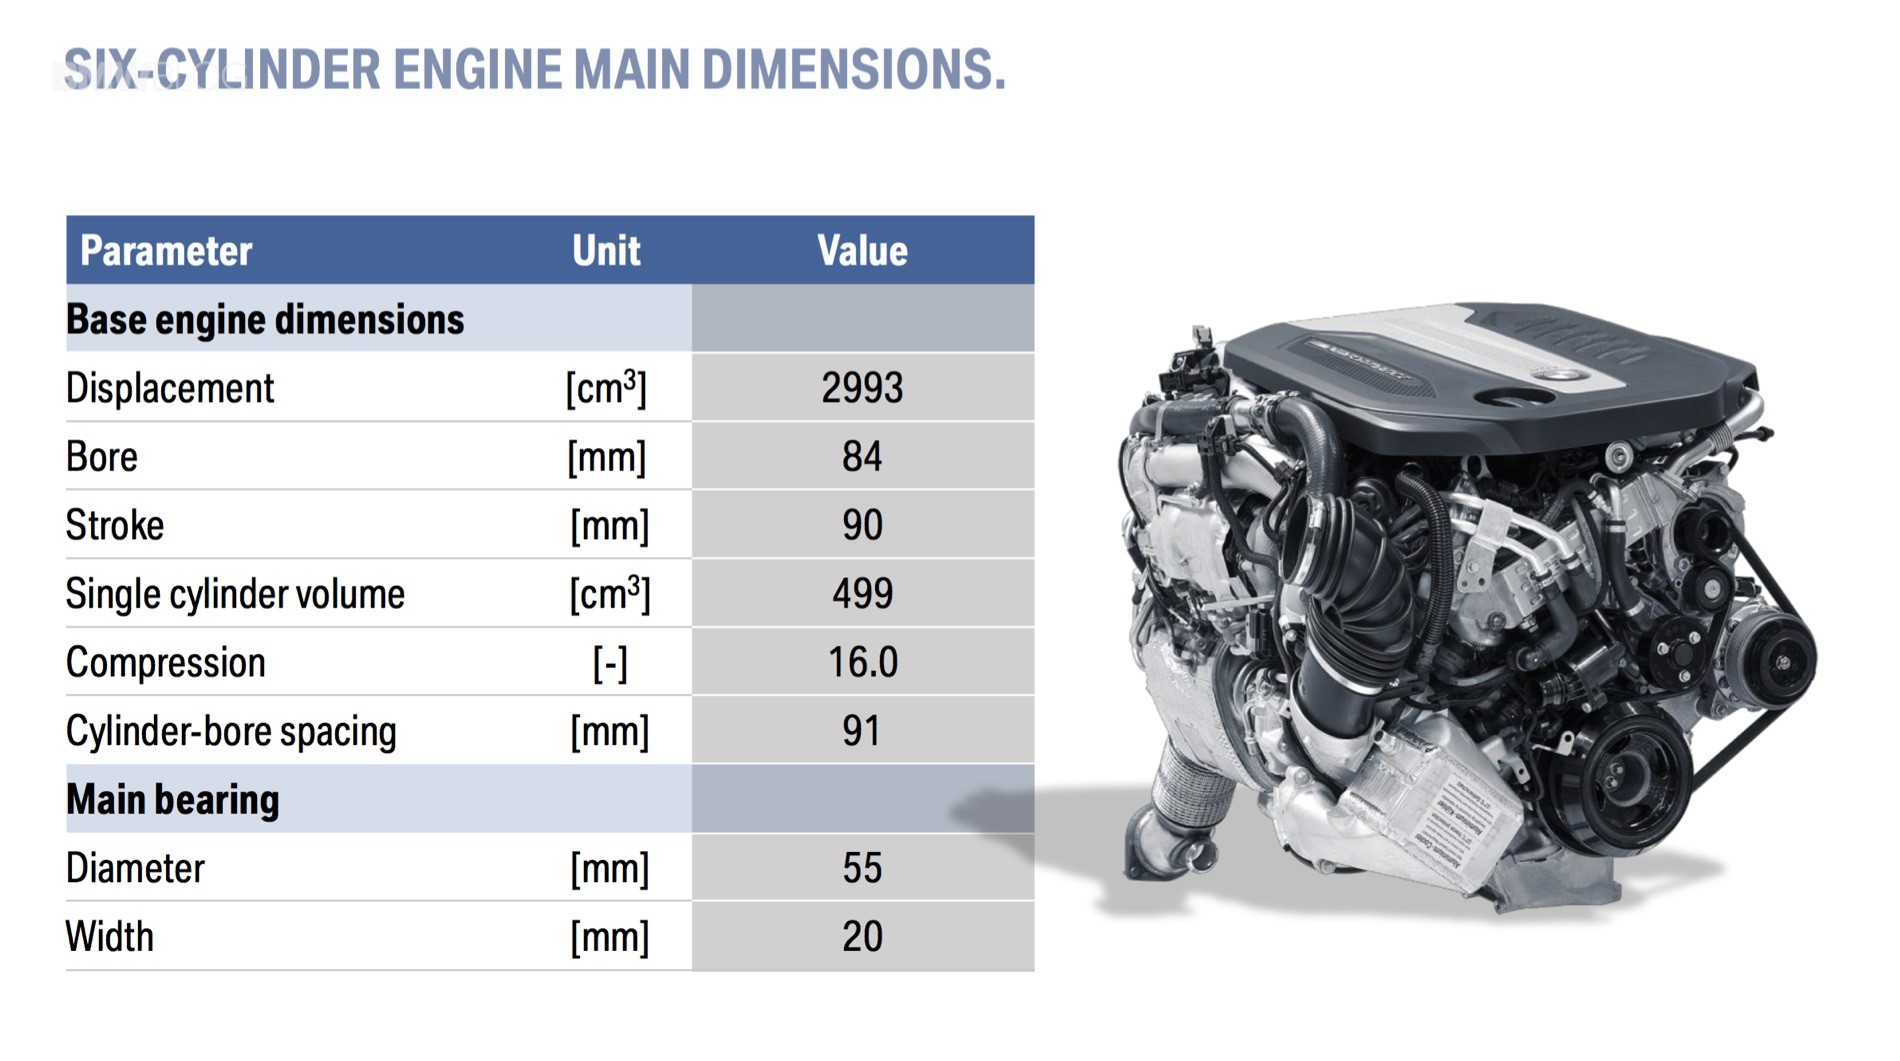 Twin Turbocharger Diagram Full Details On the New Bmw Quad Turbo Sel B57 Engine Of Twin Turbocharger Diagram